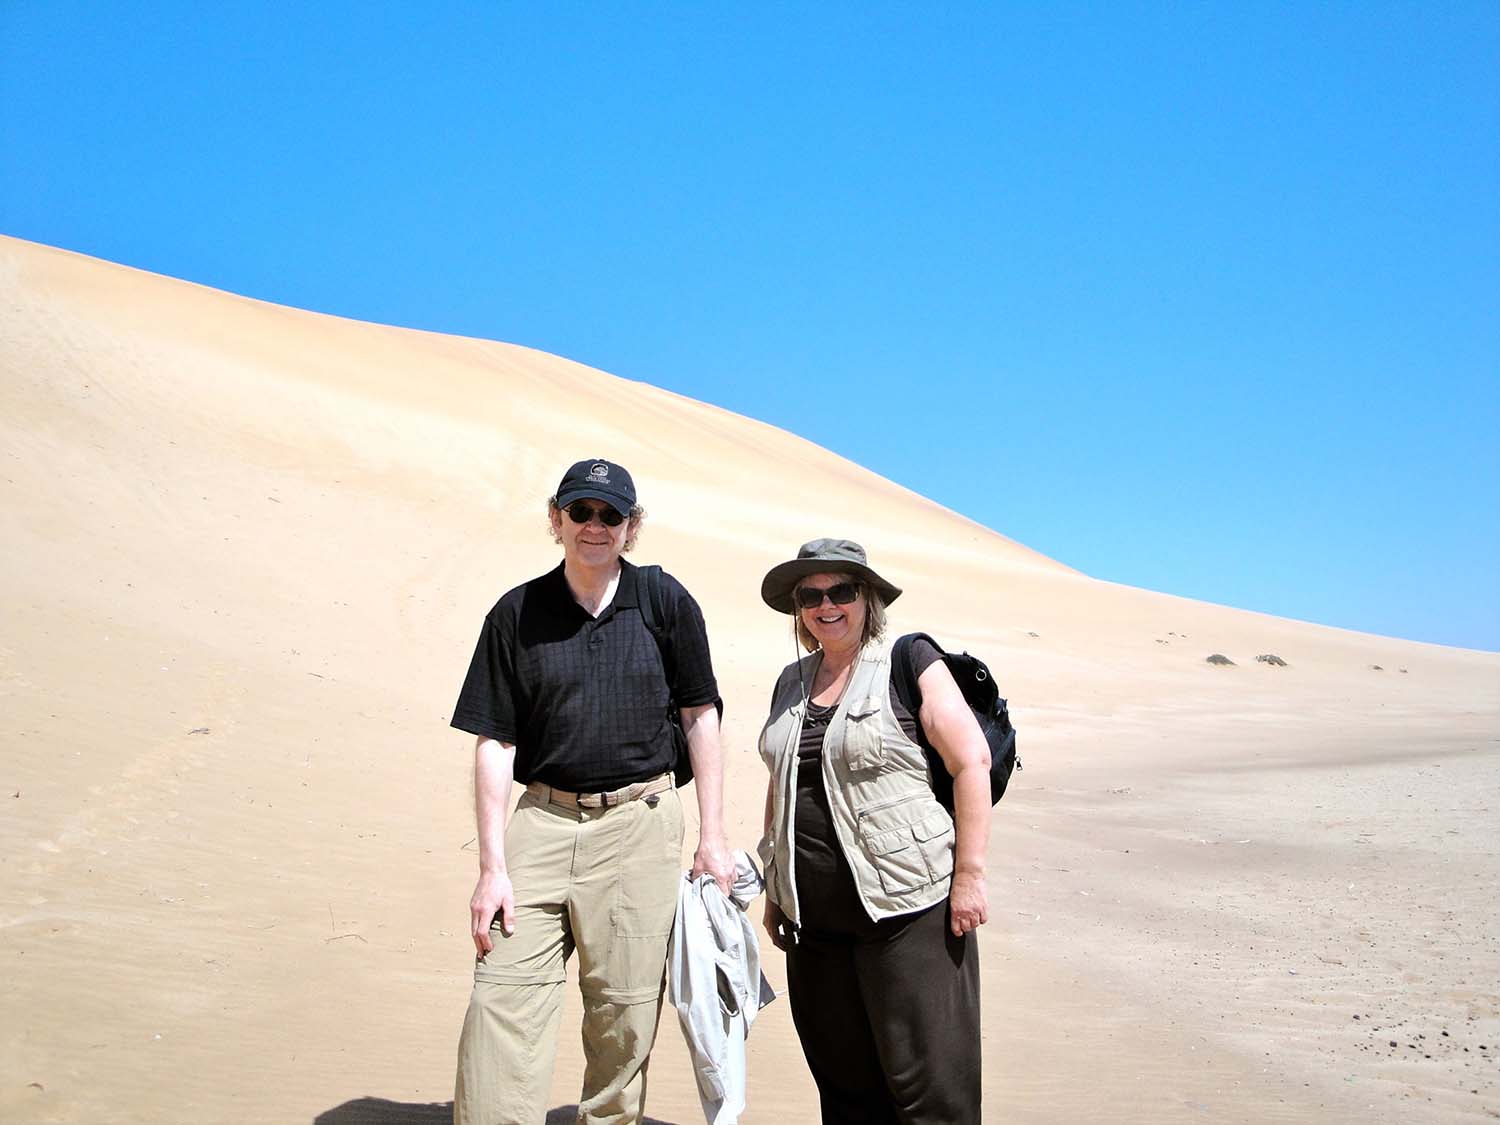 Brian & his wife in Nambia